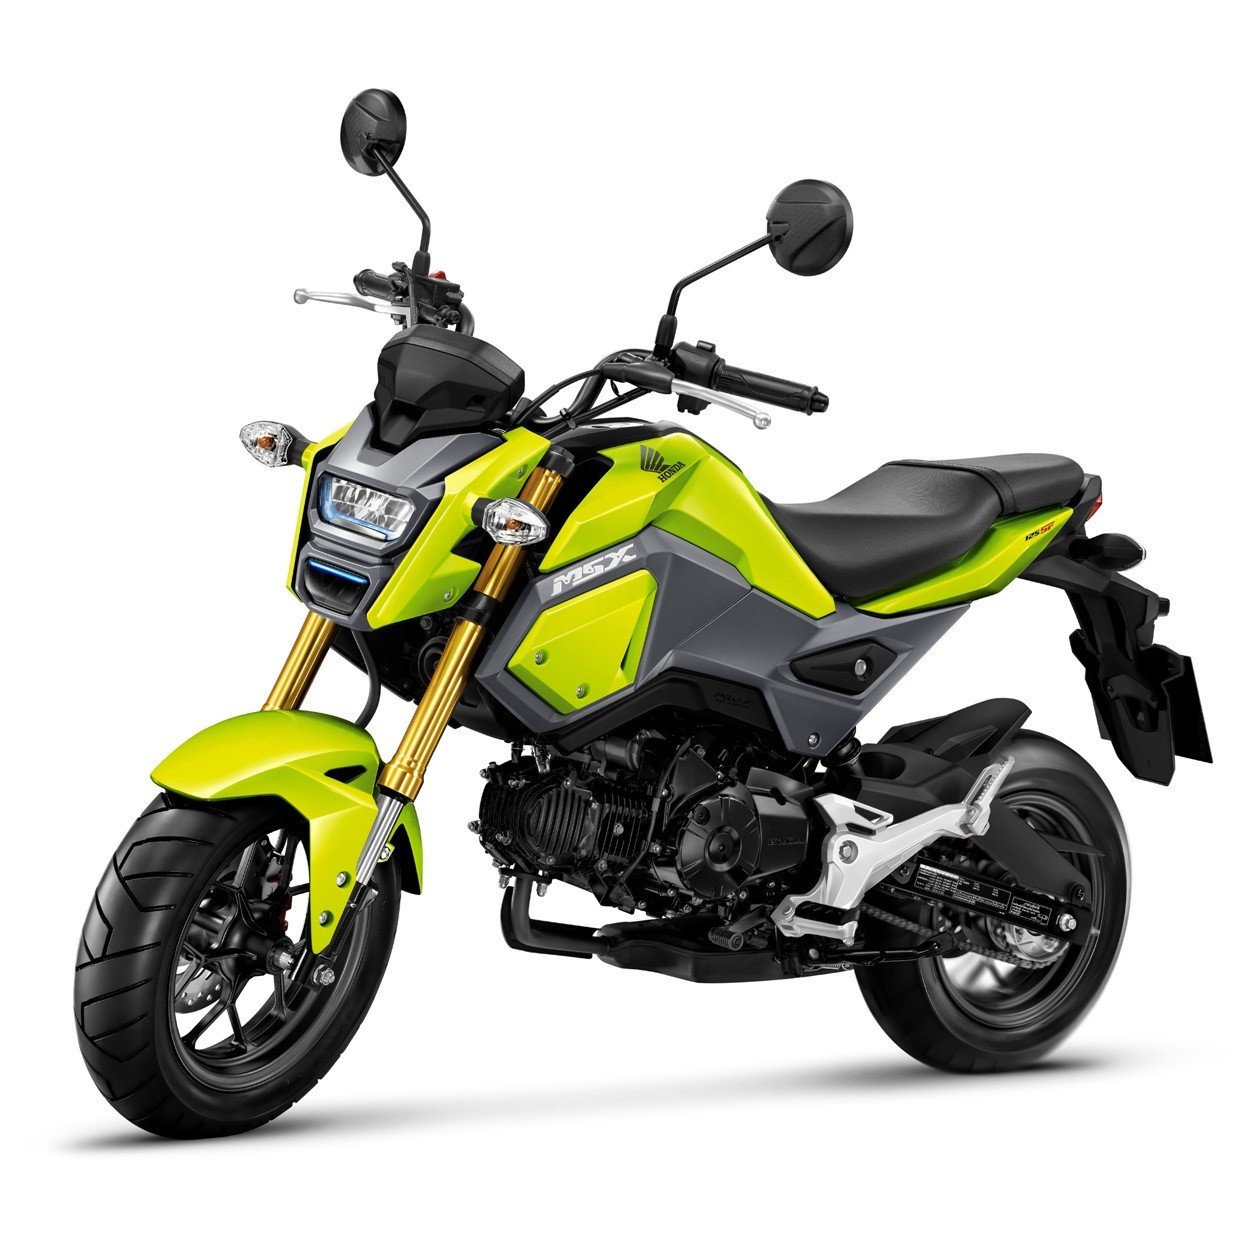 Honda Grom 125 pics specs and list of seriess by year